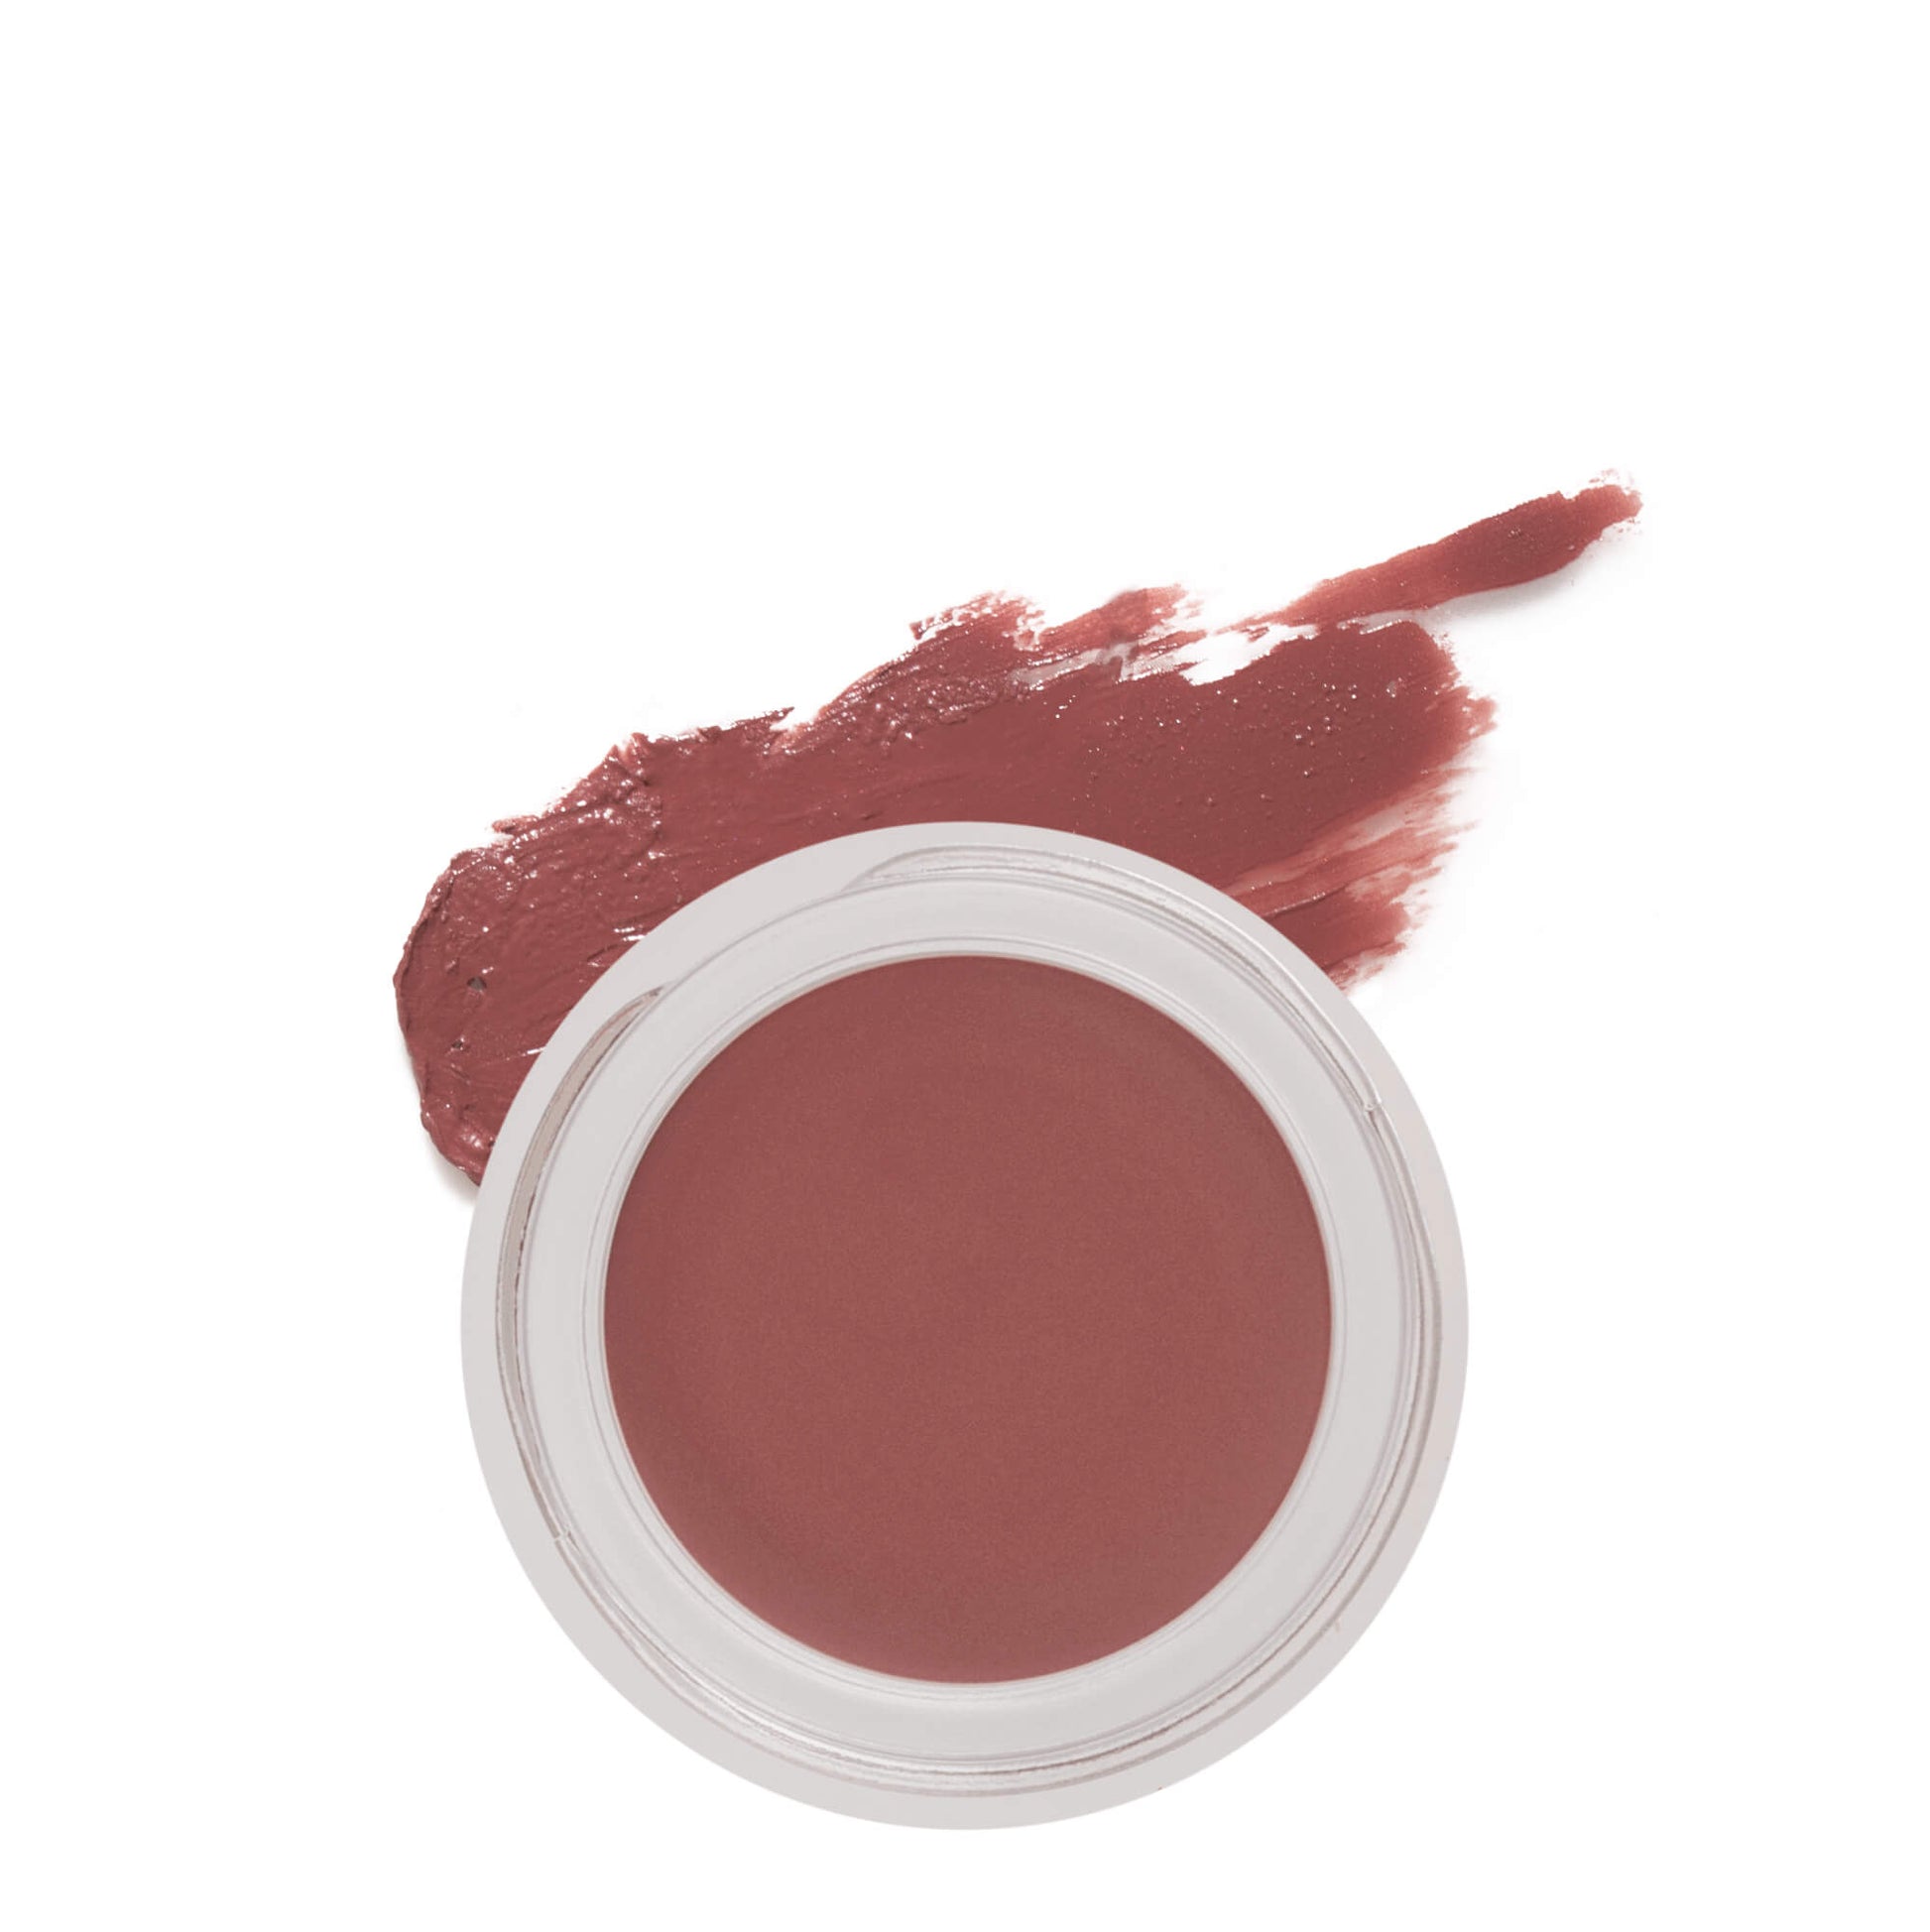 Superfood Face Tint (Merlot) | RAWW Cosmetics | Product + Swatch